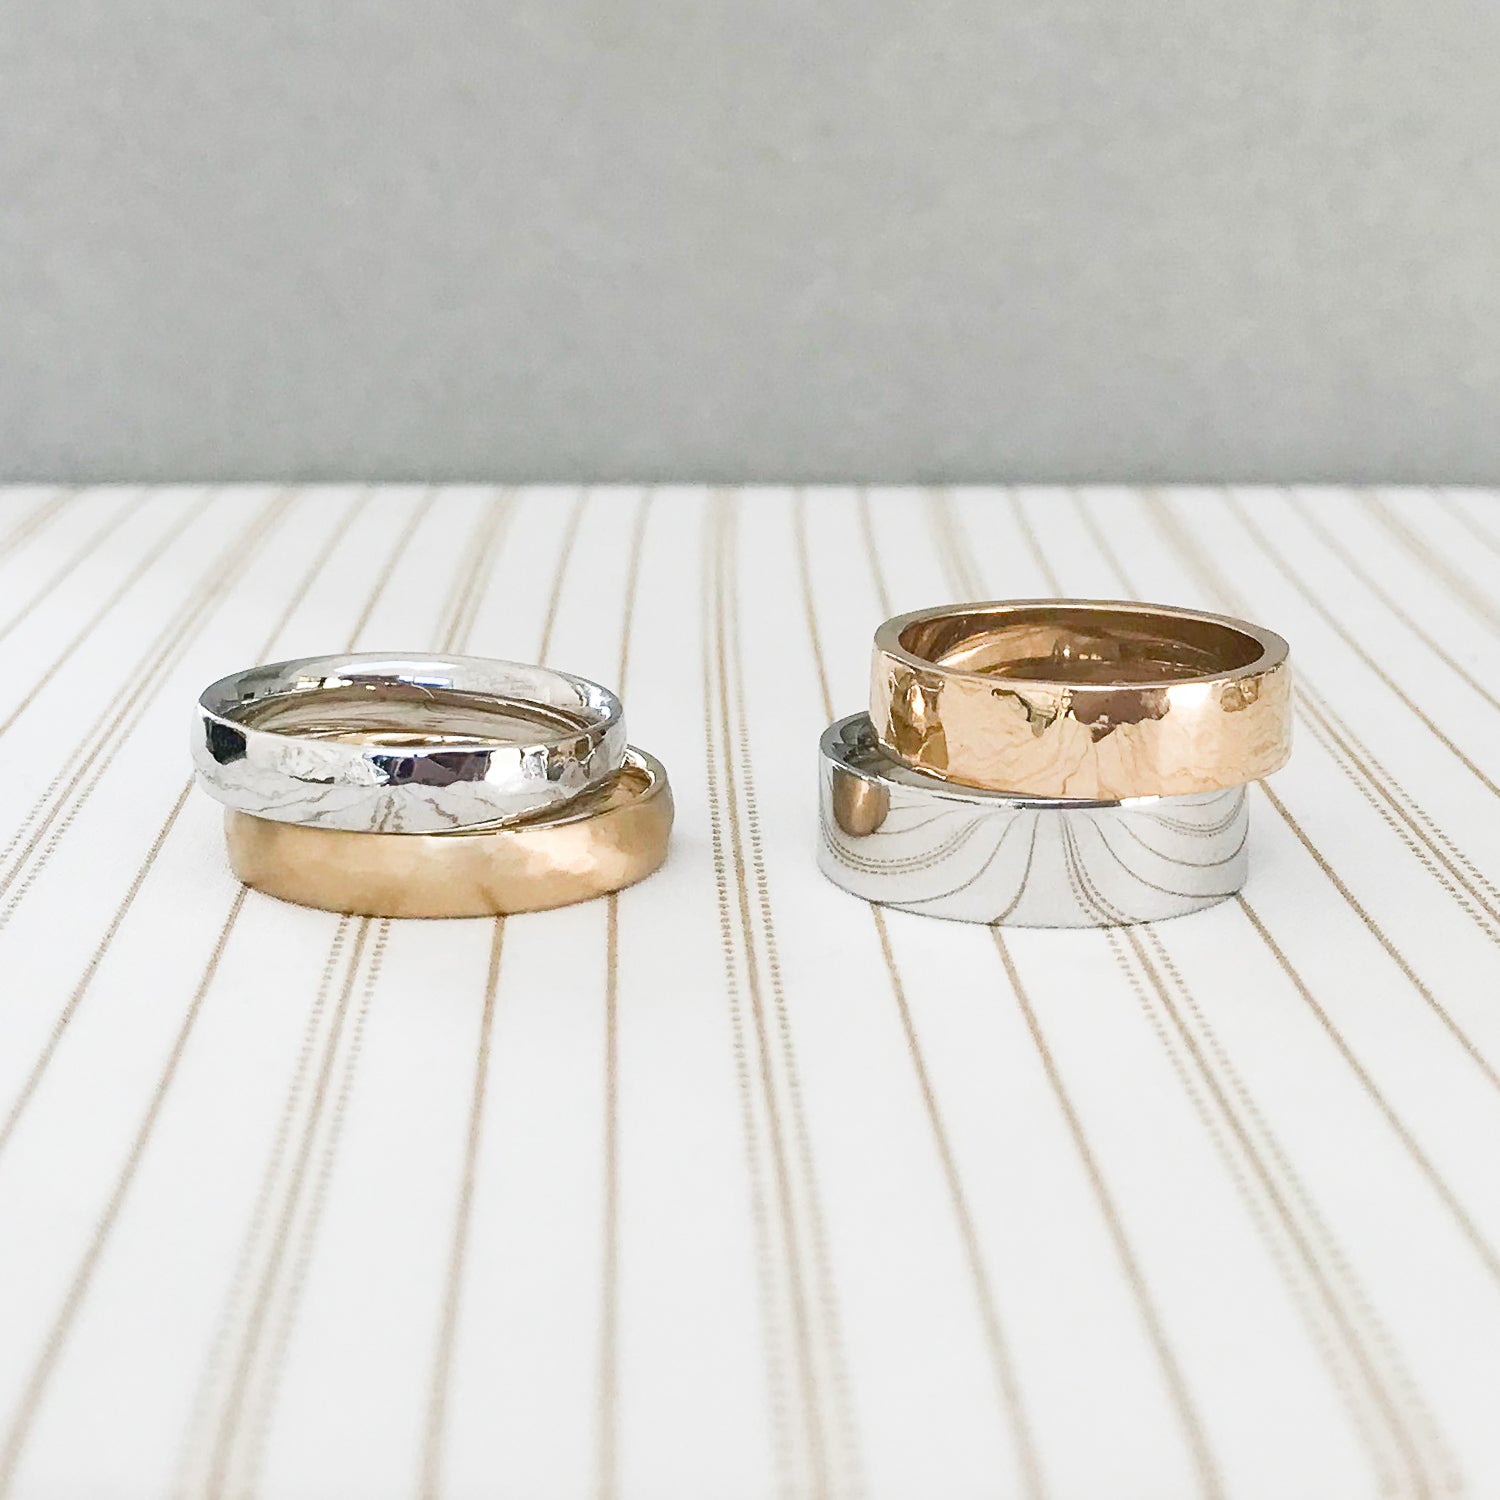 Classic men's wedding bands of various shapes and widths